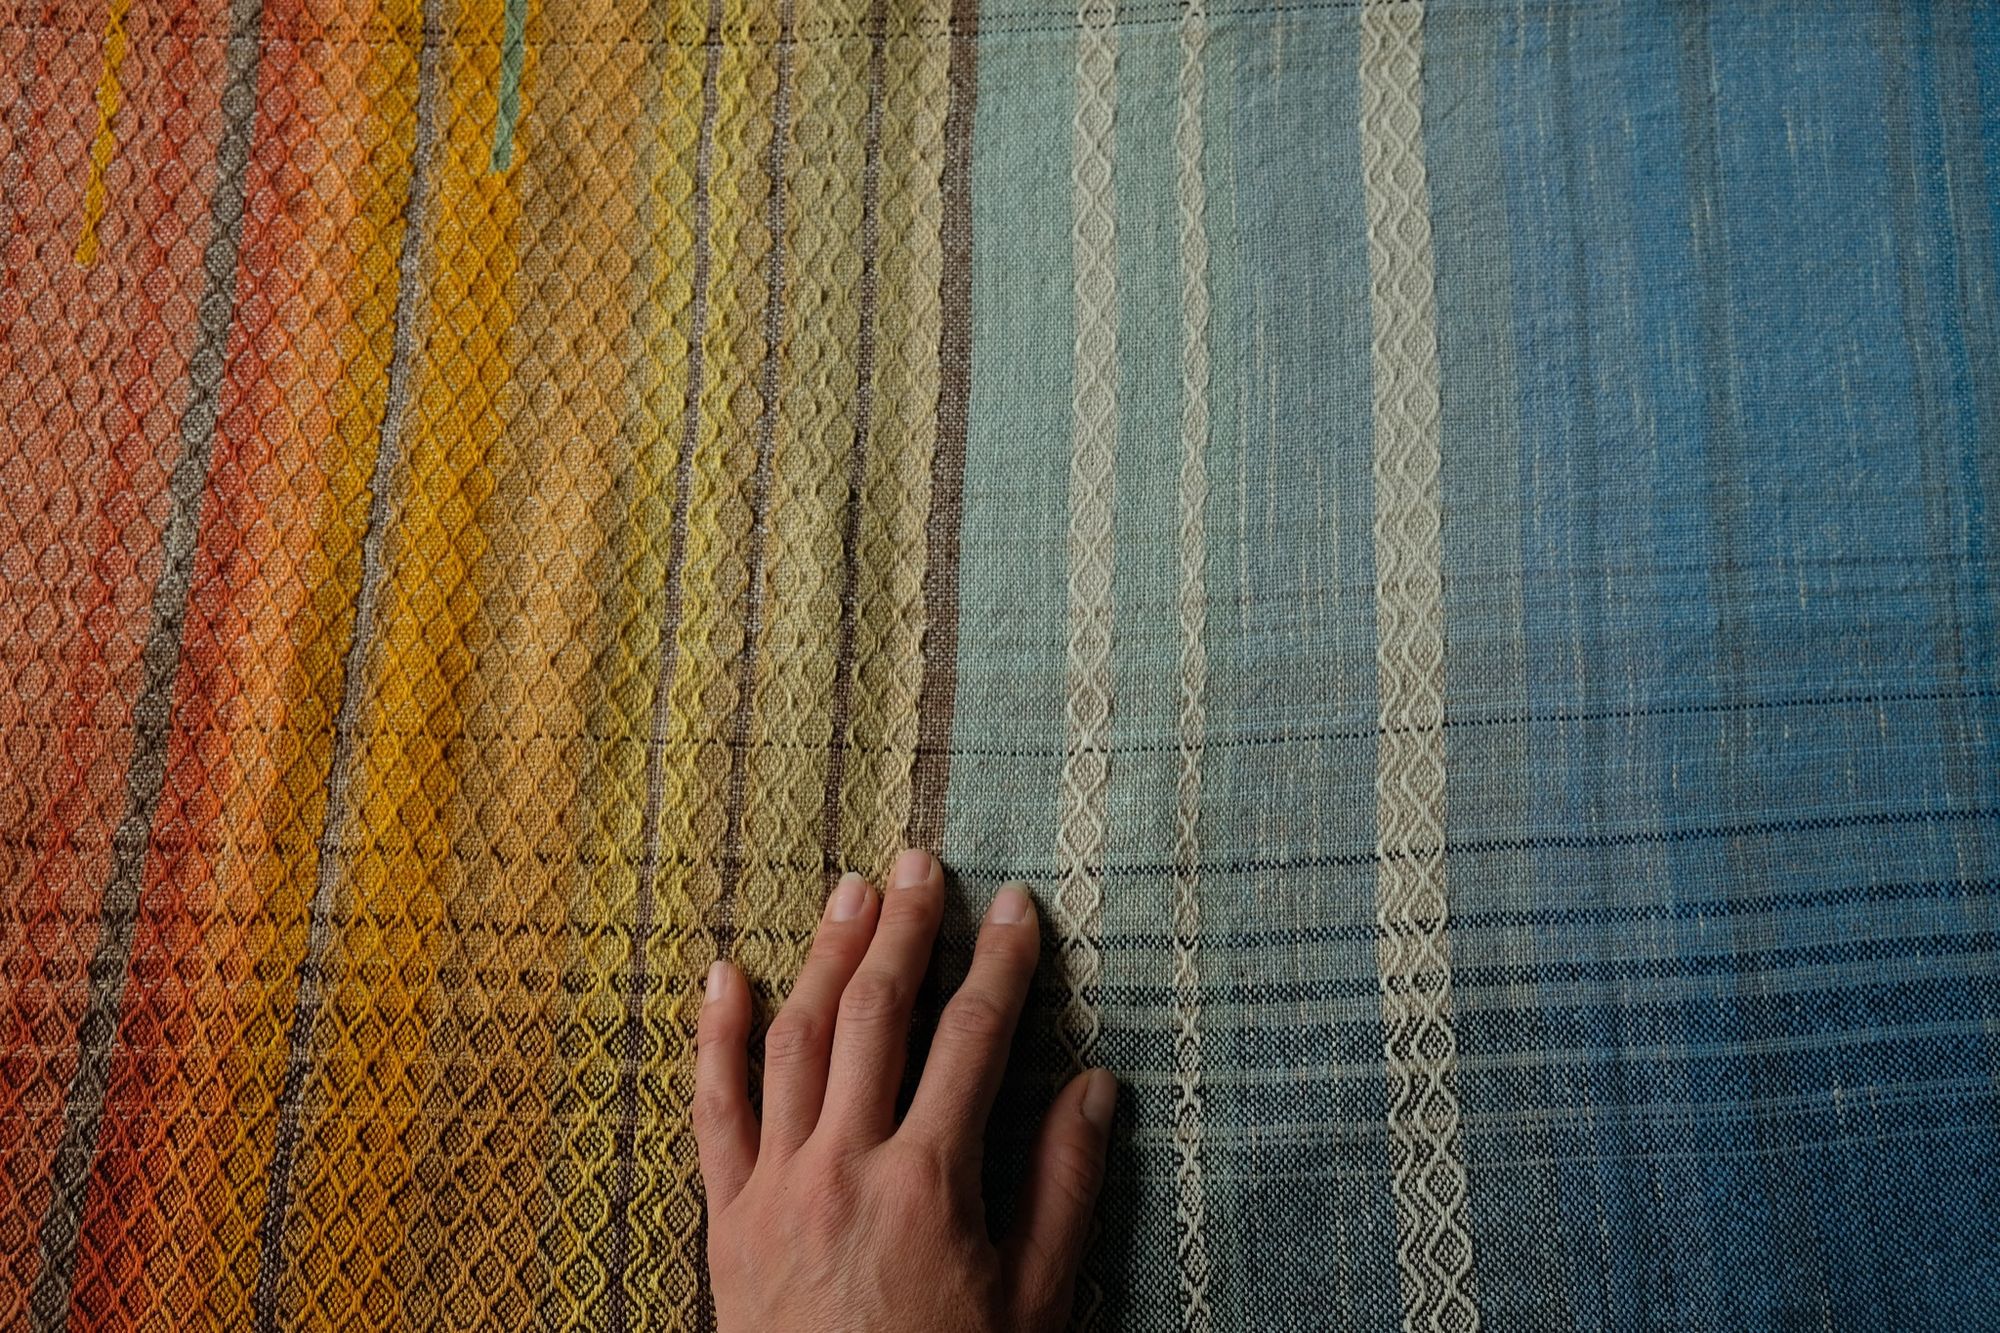 A hand resting on large brown, red, orange, yellow, blue and green piece of handwoven fabric laying on a wooden floor. 